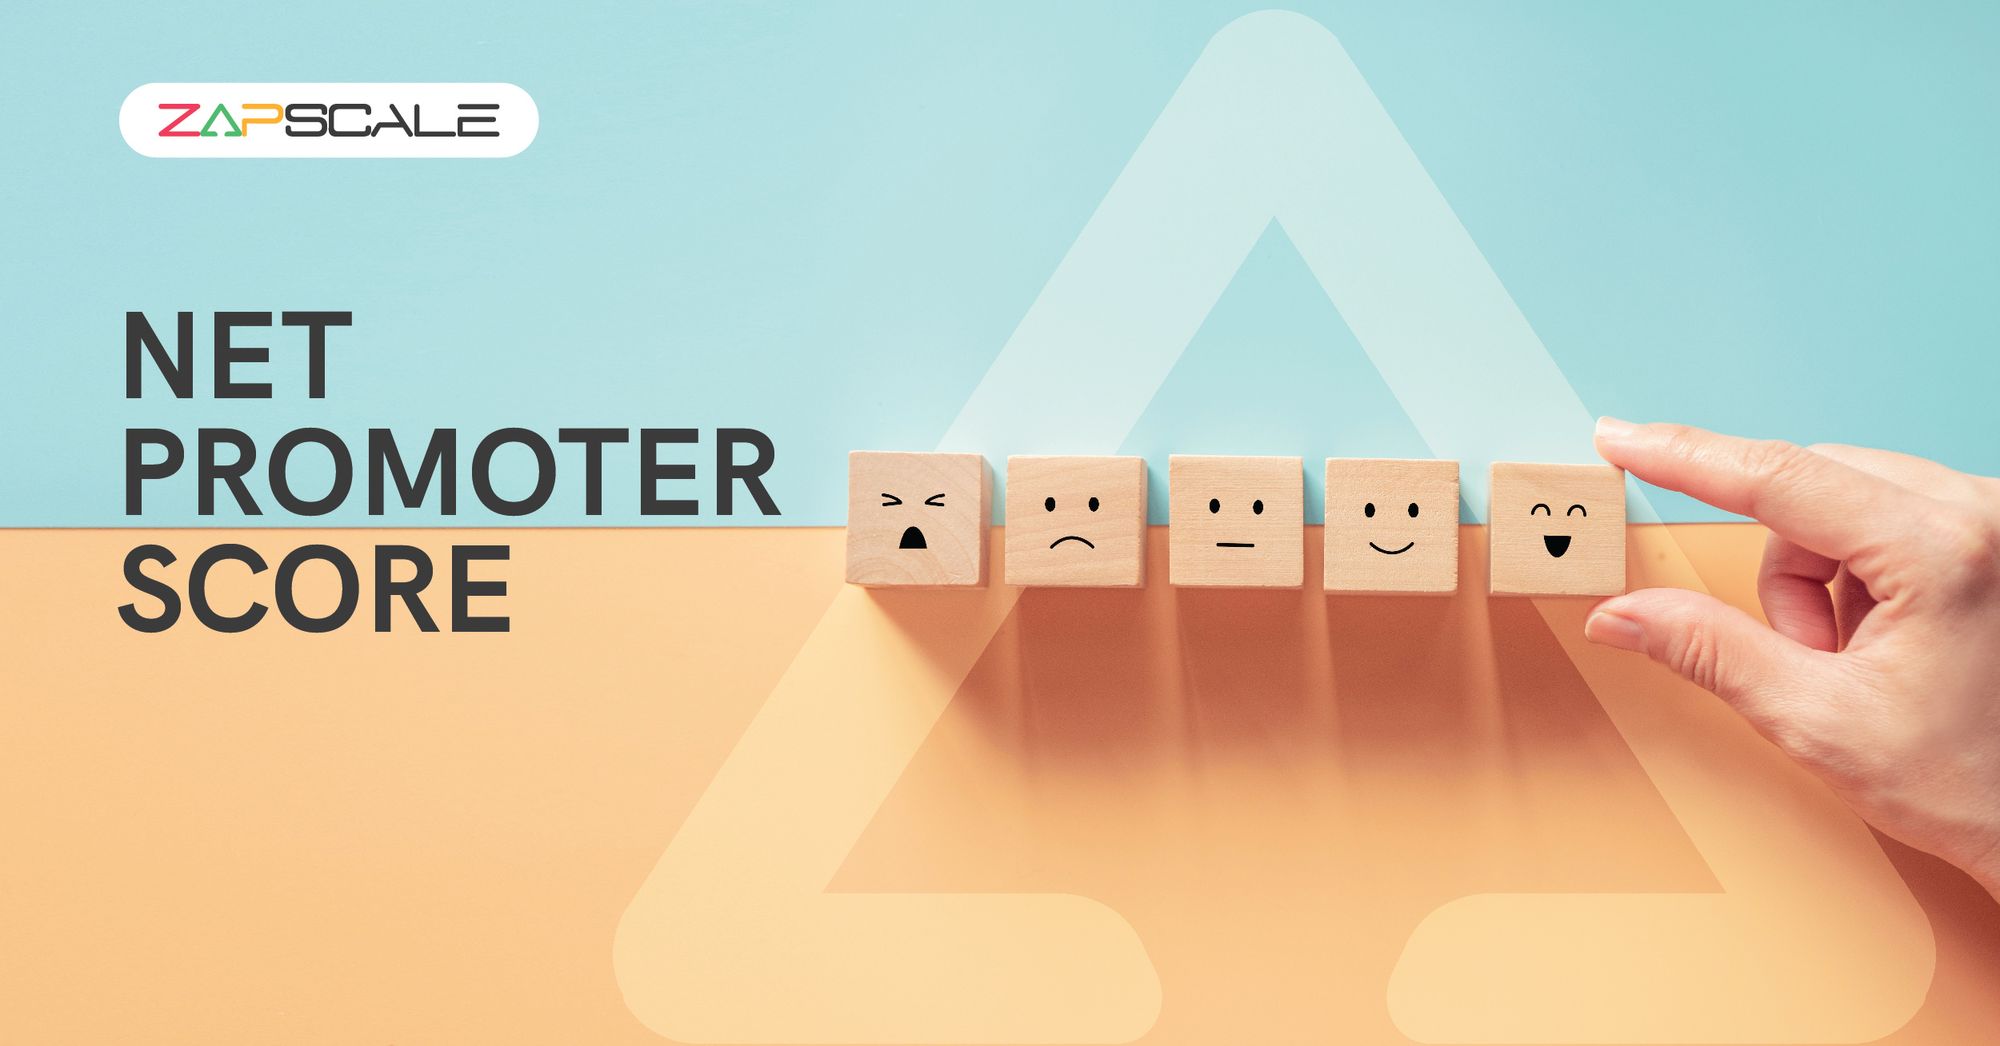 What is a Net Promoter Score (NPS) and why is it important?